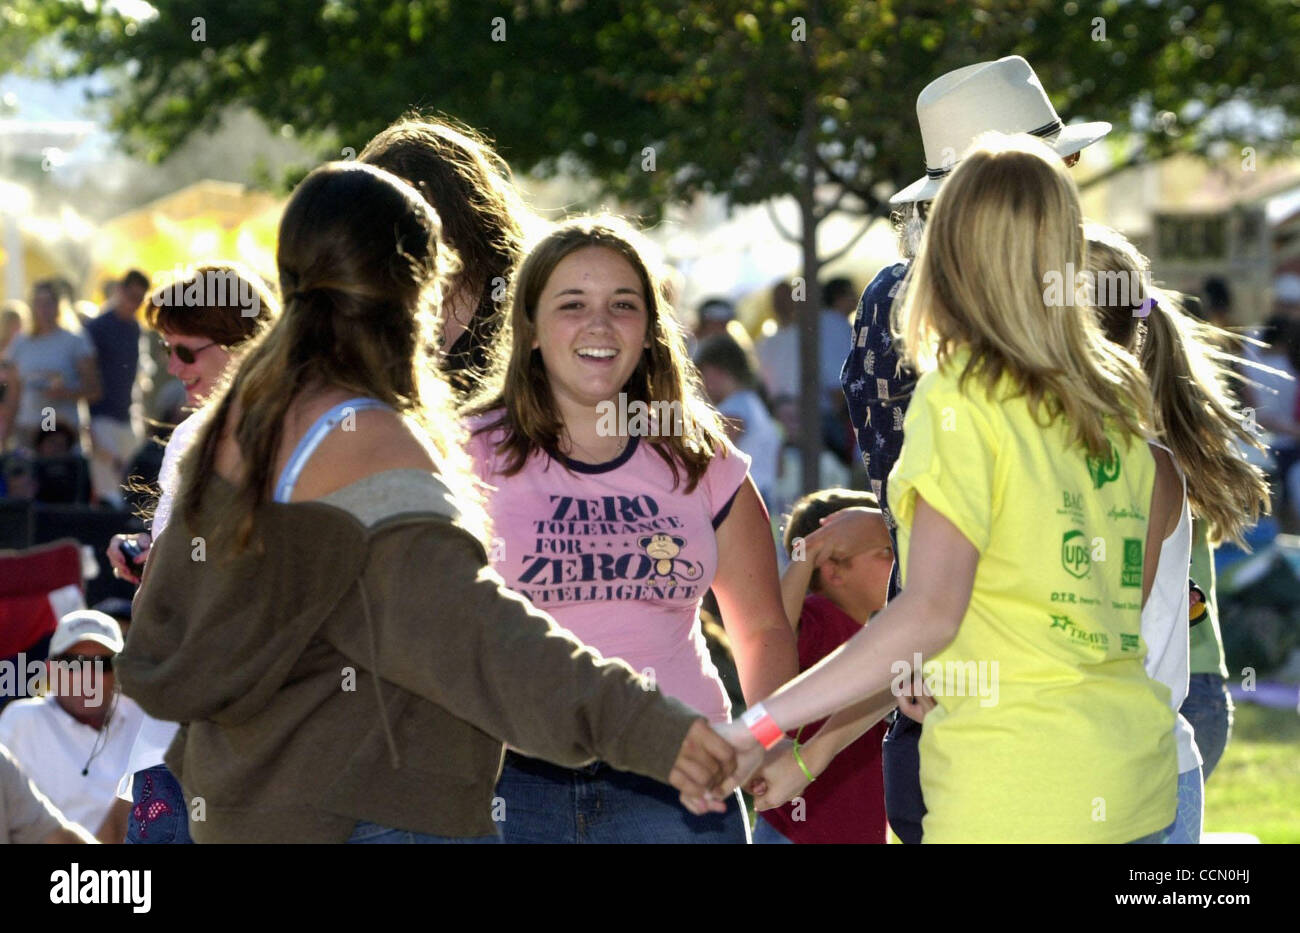 (center) Jennifer Haffen (cq), 16, of Brentwood dances with friends as Peter Tork  - Shoe Suede Blues perform on the park stage at the 12th Anniversary CornFest in Brentwood, Calif., on Saturday, July 10, 2004. In addition to the live music the 3 day event features carnival rides, games, and lots of Stock Photo